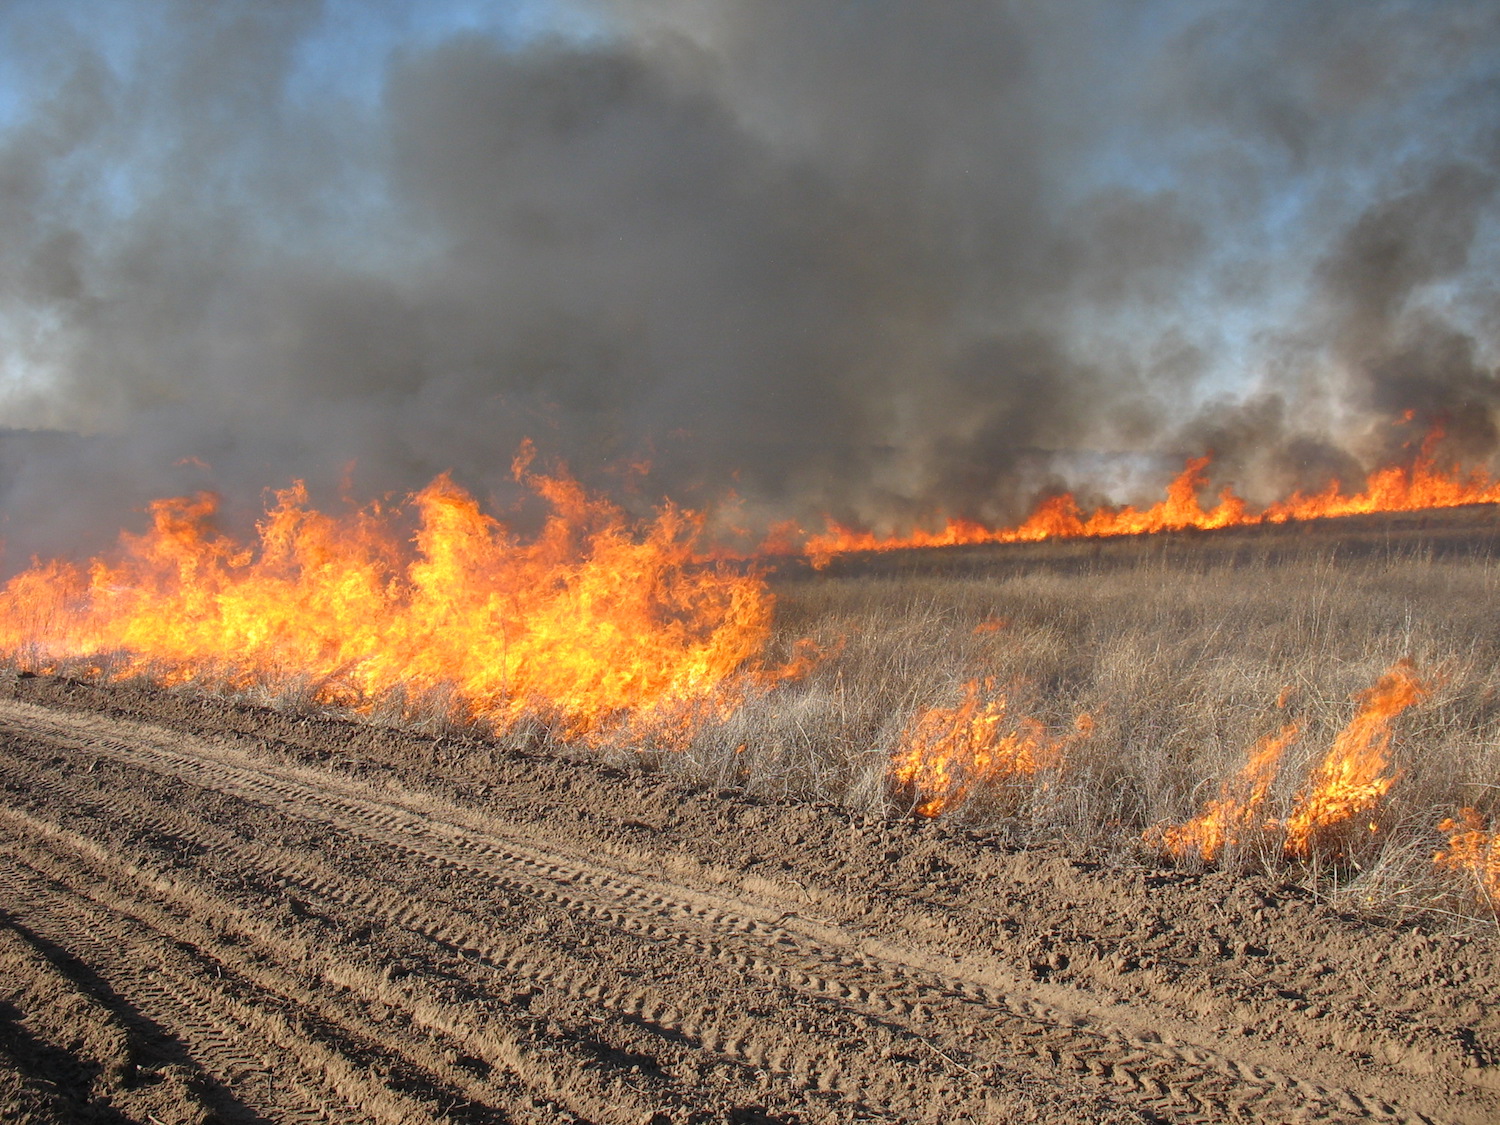 Dormant field with fire visible along two sides, in front of a burn line of bare earth